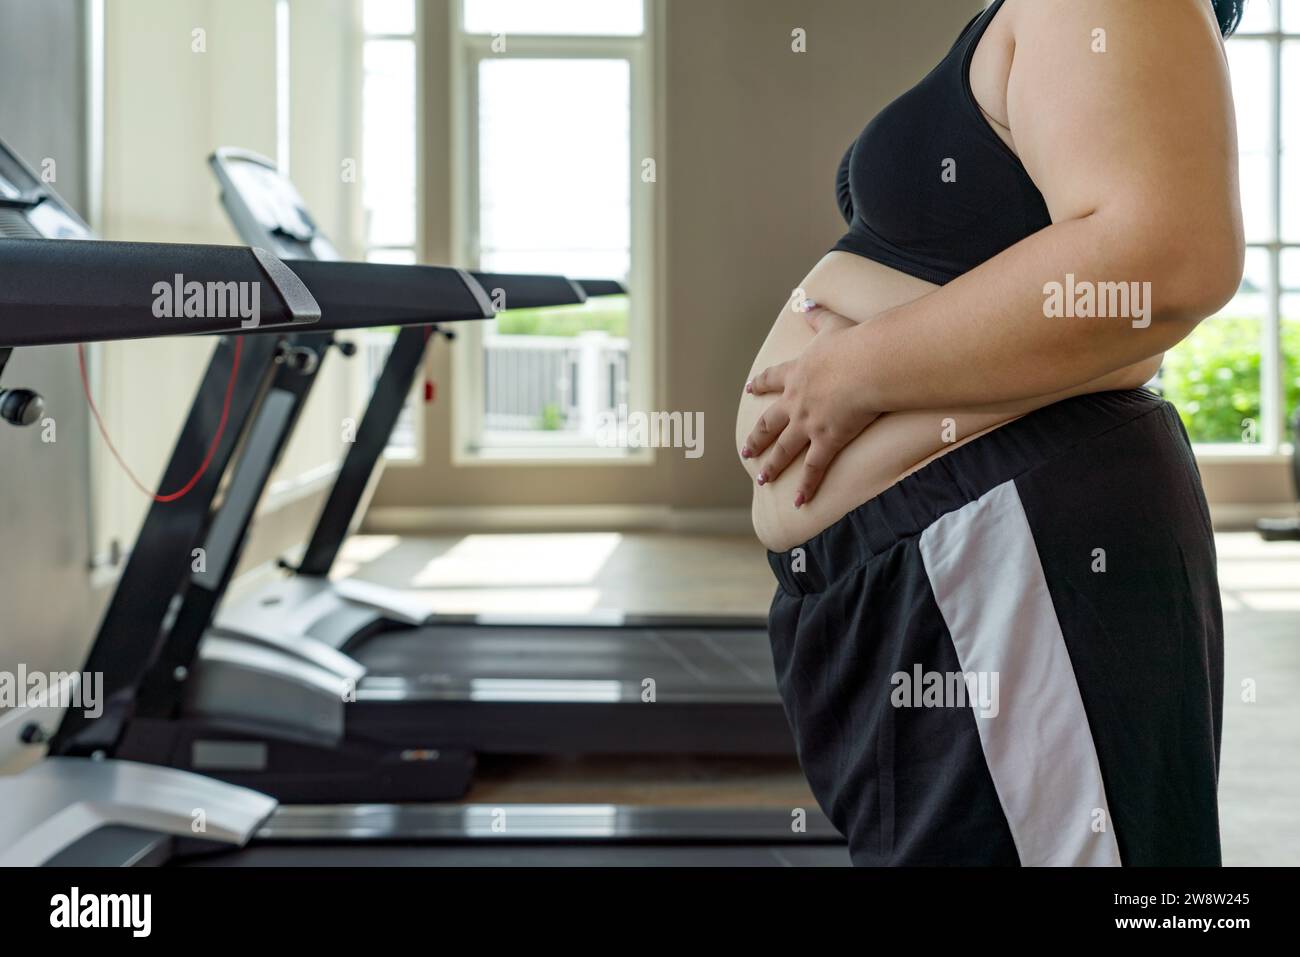 A plus-sized woman placing her hand on her belly, standing confidently in a well-equipped gymnasium. Side view Stock Photo